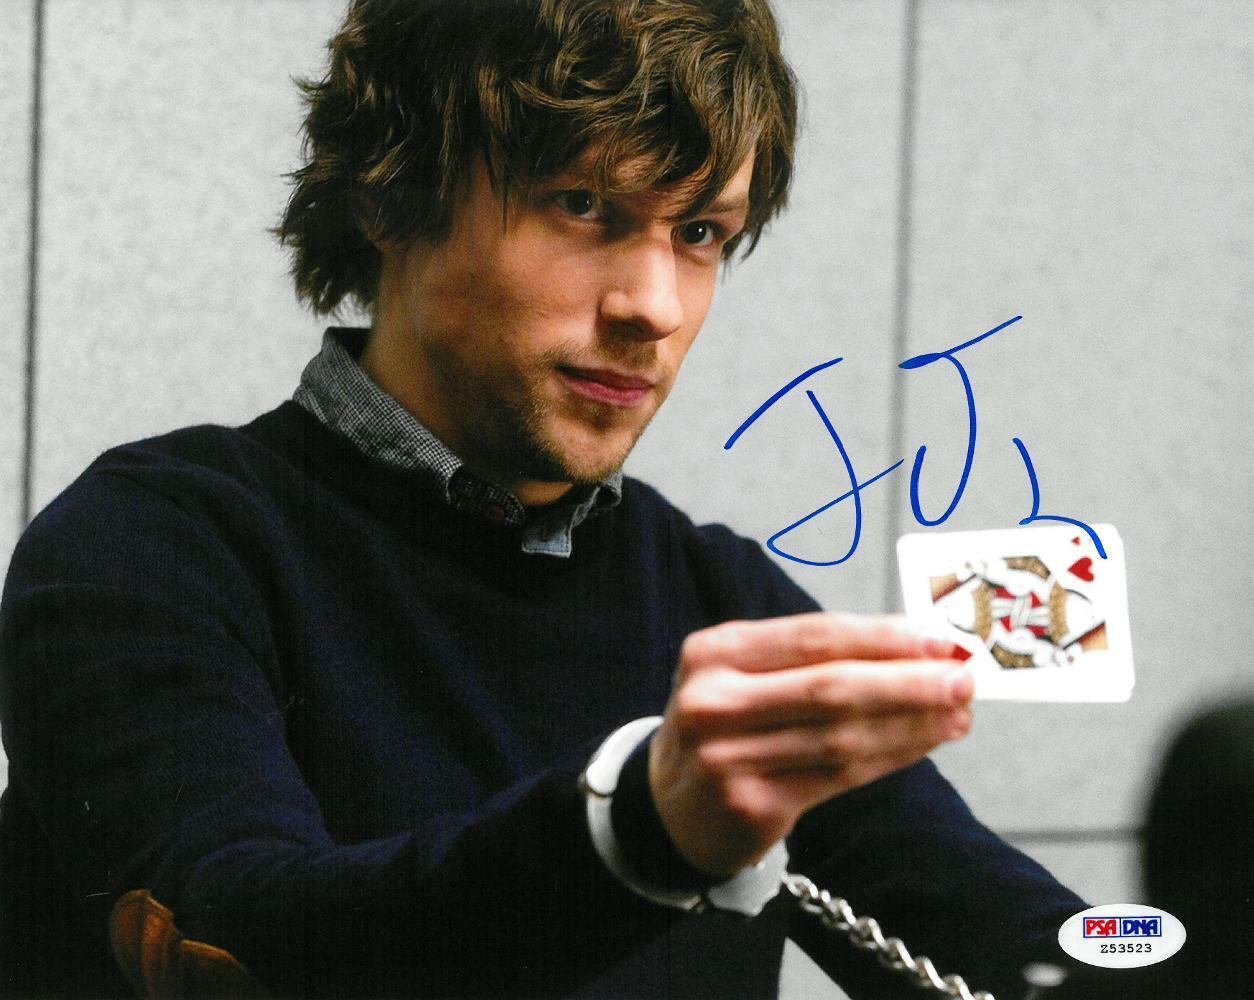 Jesse Eisengerg Signed Now You See Me Autographed 8x10 Photo Poster painting PSA/DNA #Z53523